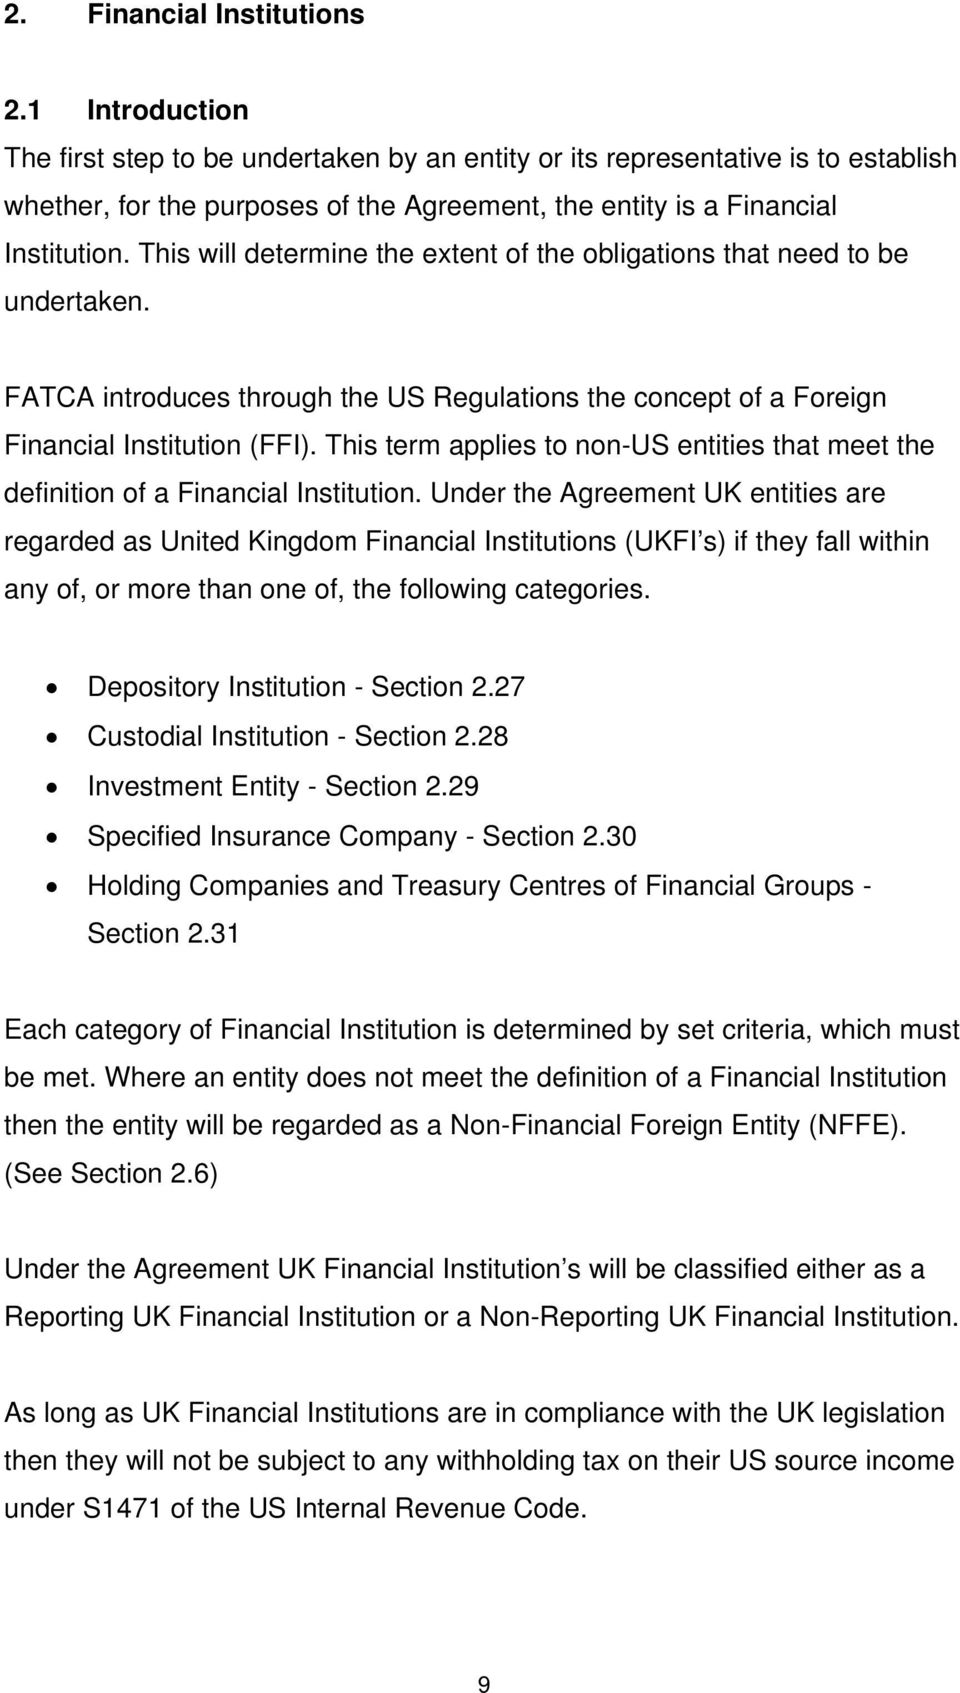 This will determine the extent of the obligations that need to be undertaken. FATCA introduces through the US Regulations the concept of a Foreign Financial Institution (FFI).